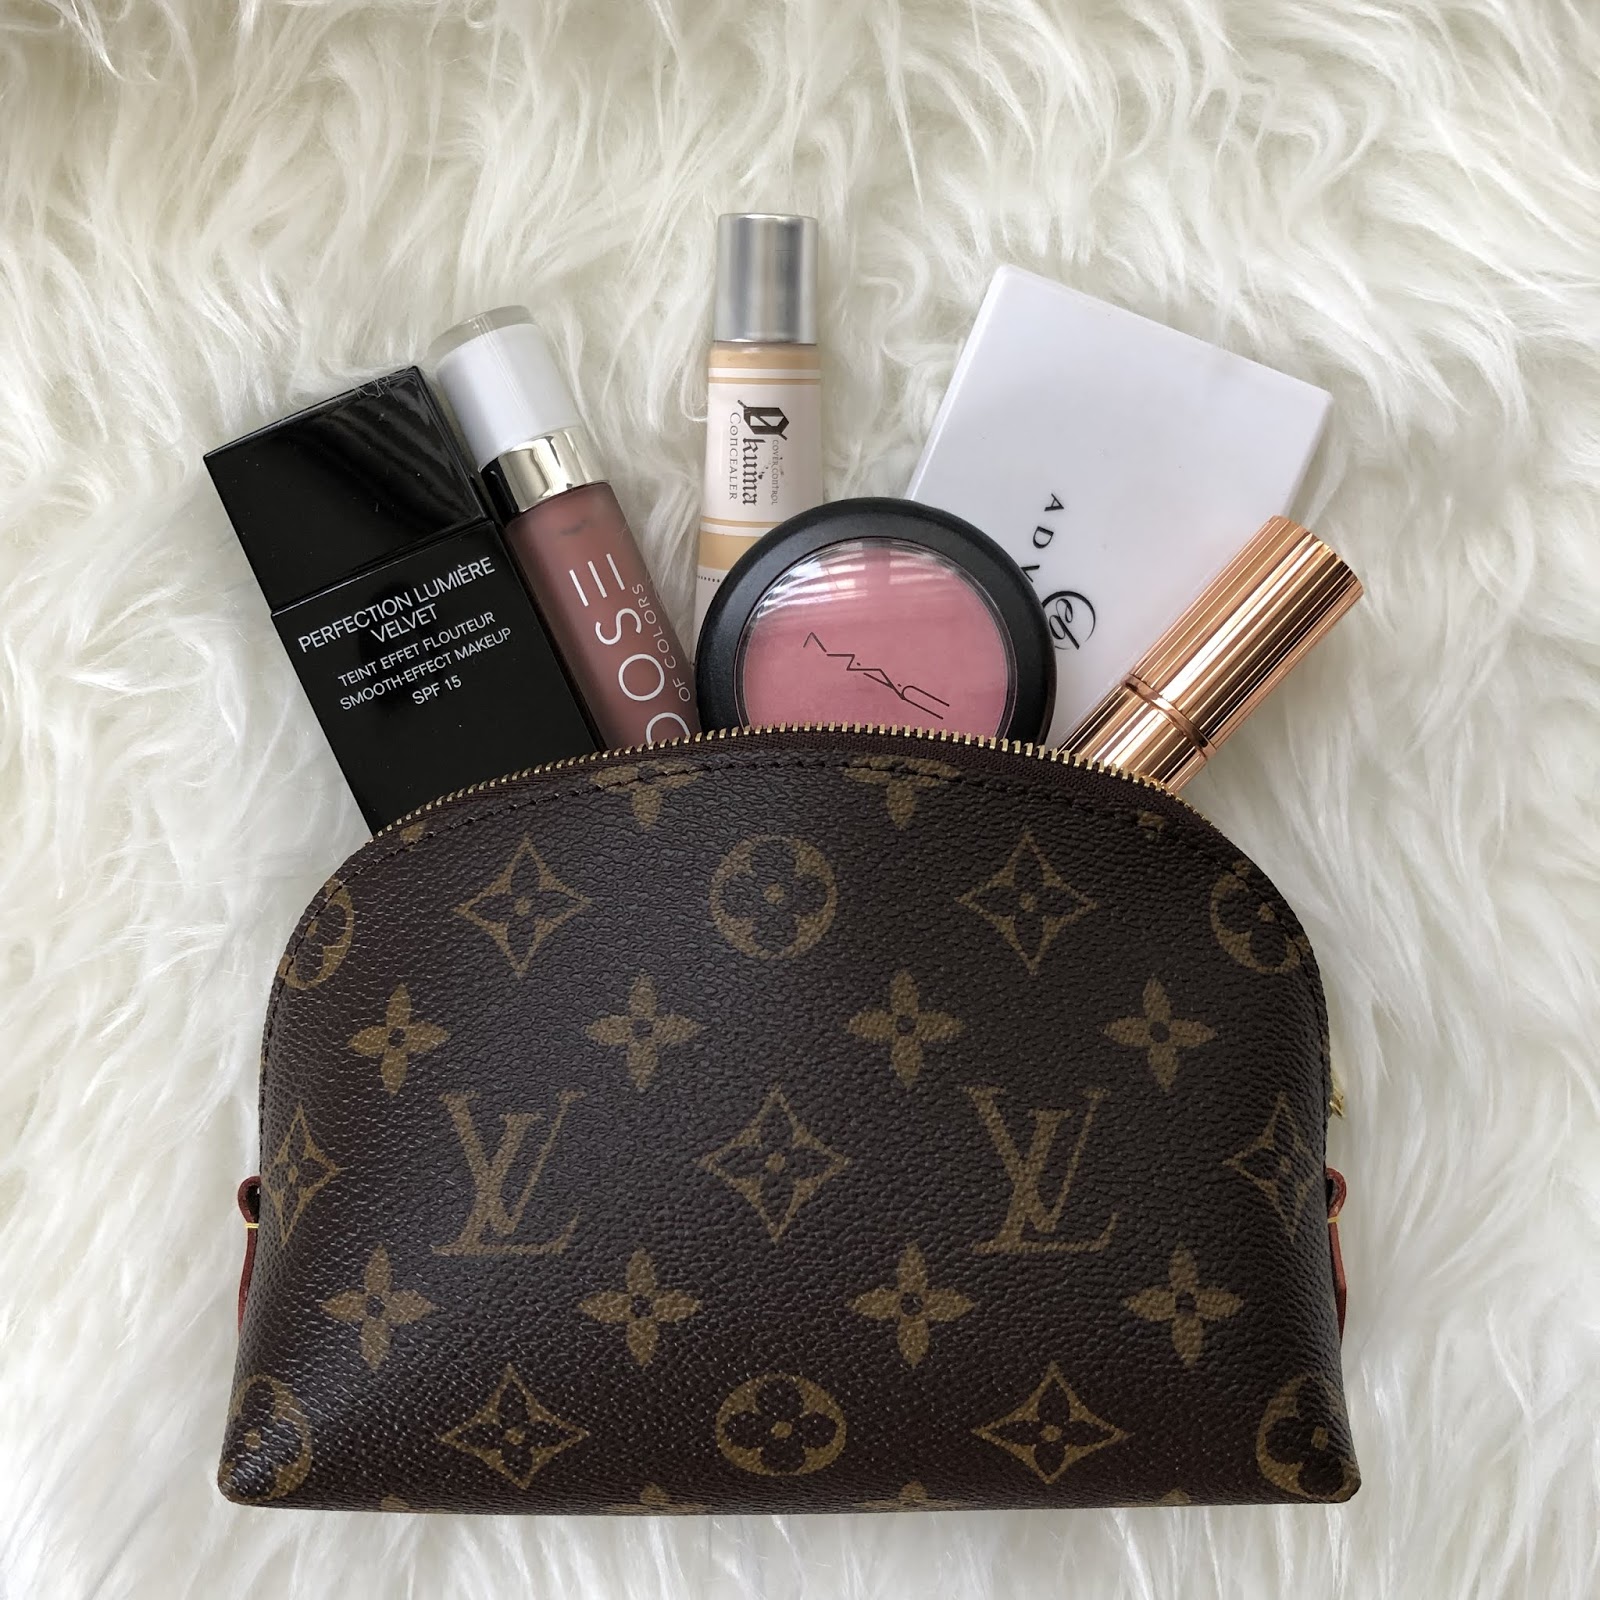 Unboxing my cosmetic pouch! I only order LV online since the